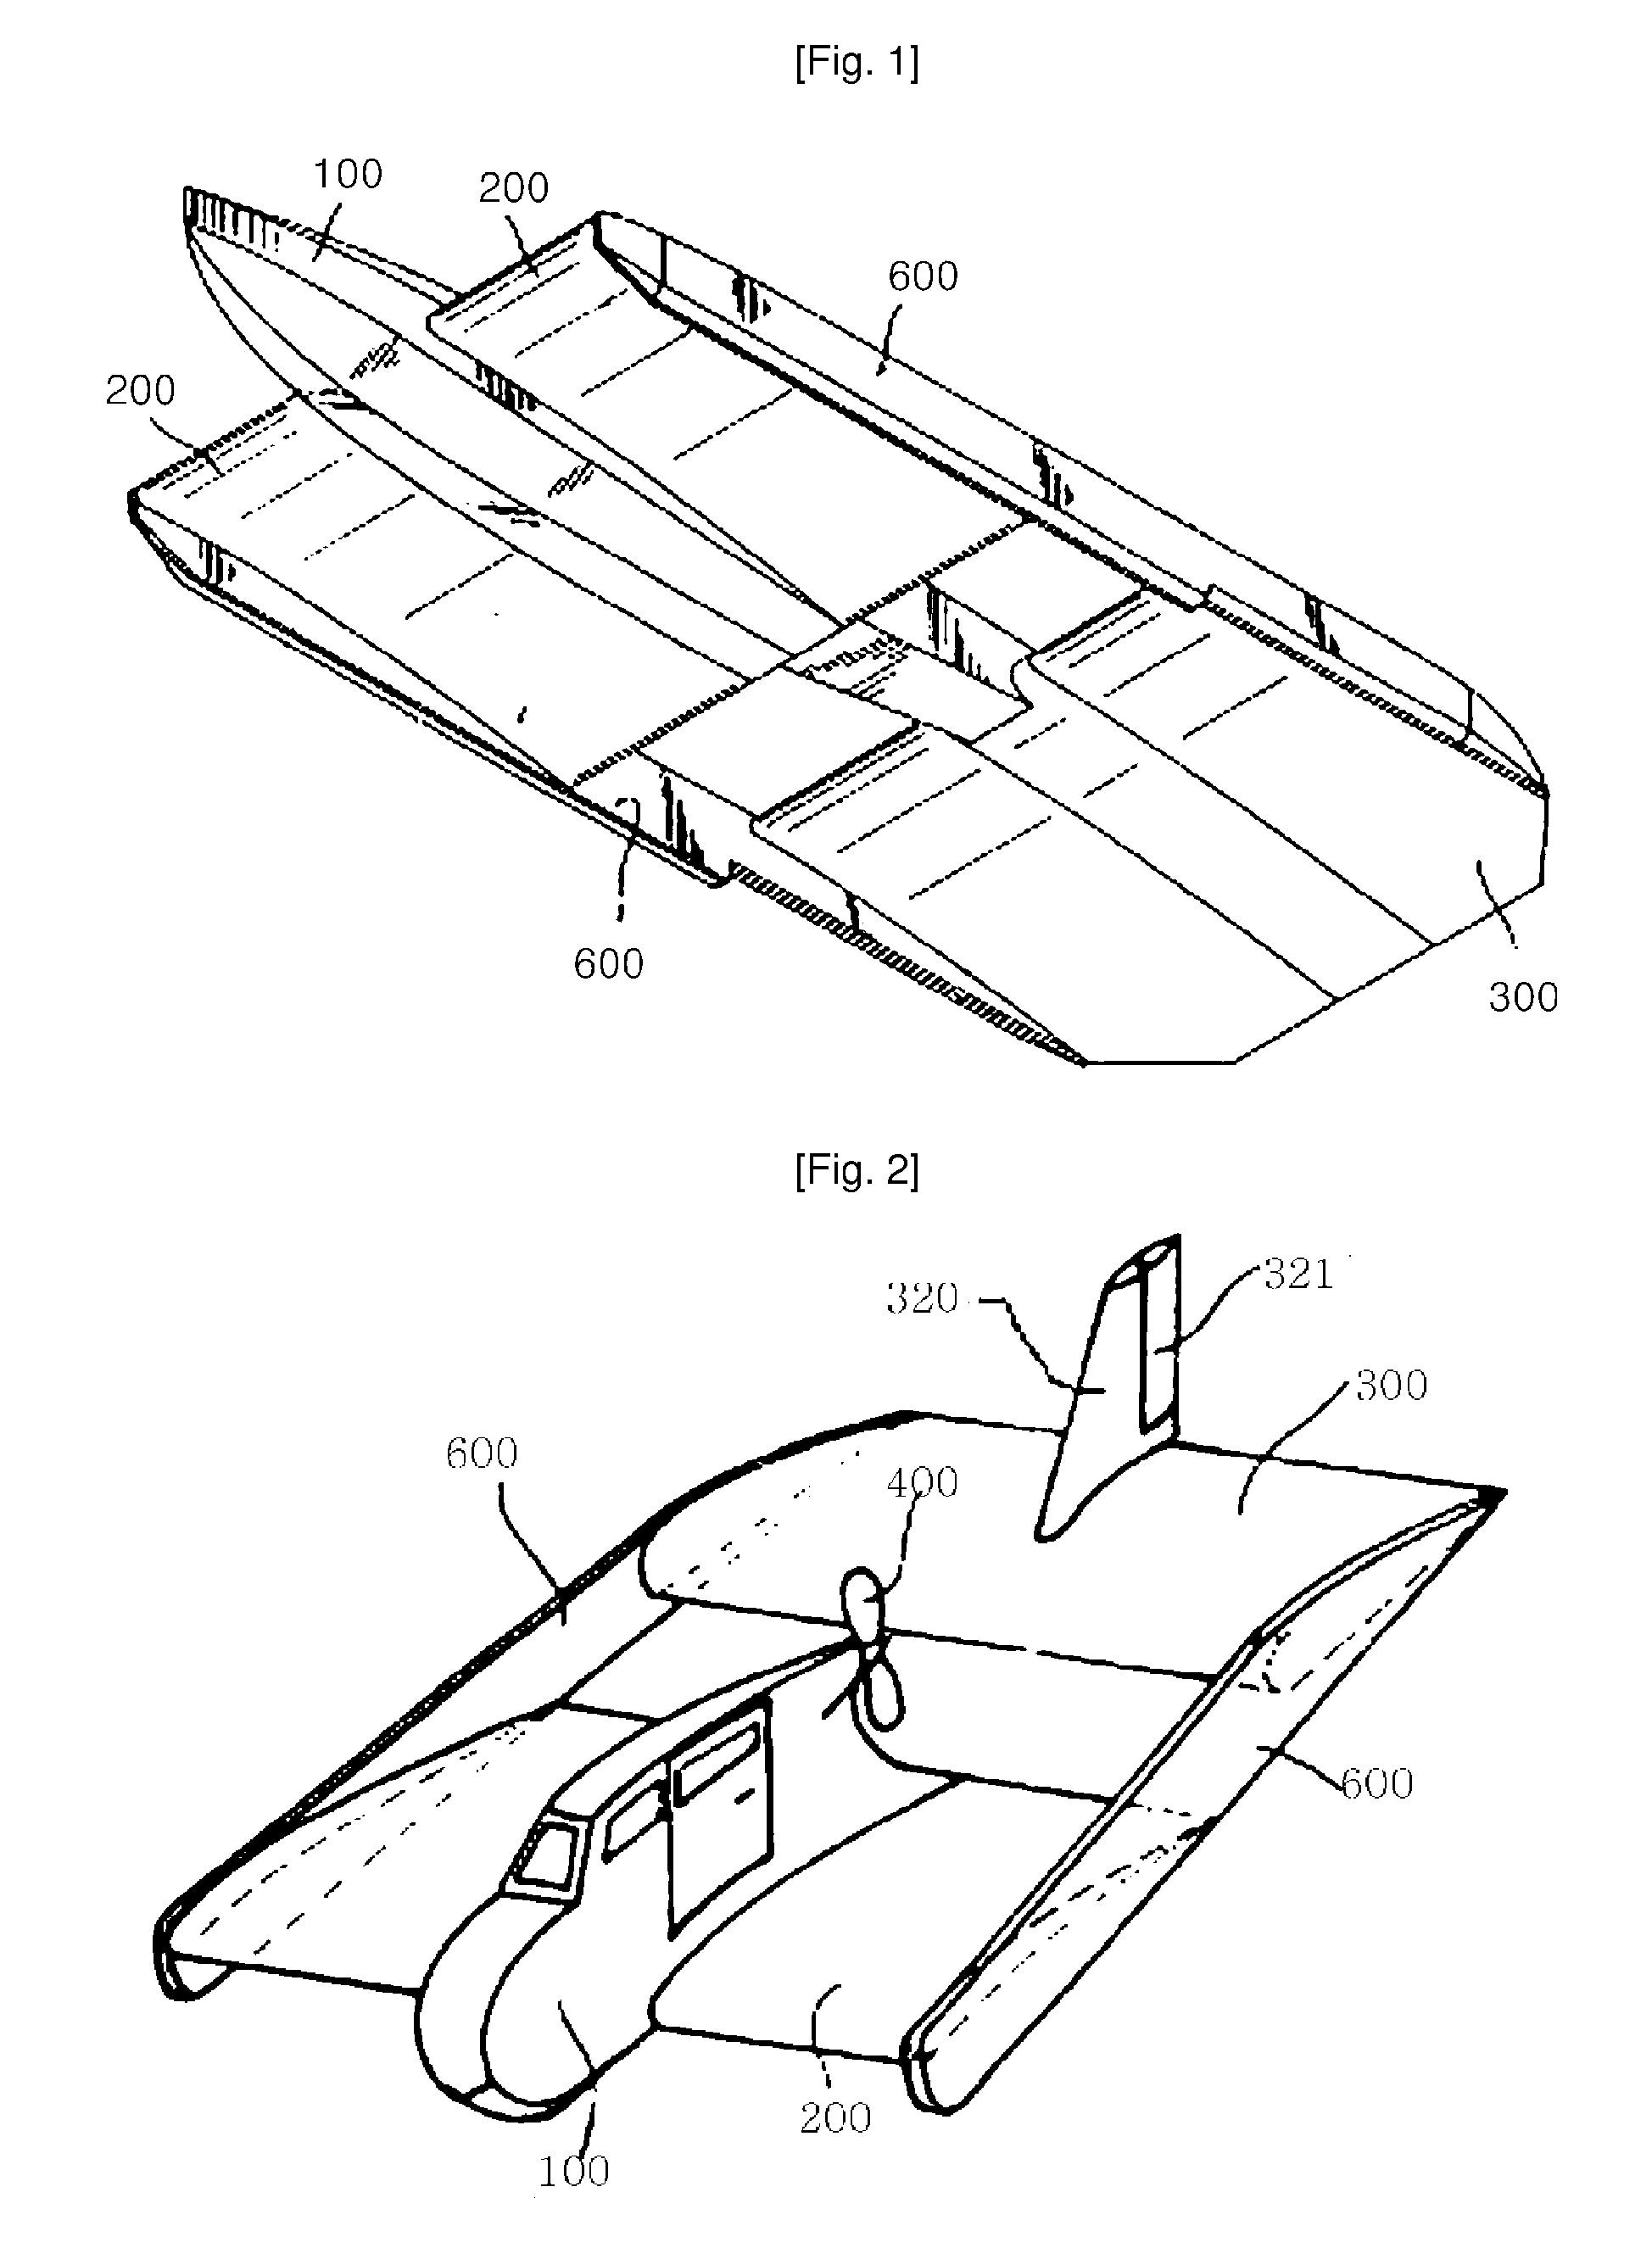 Tandem/canard wig boat with suspension systems